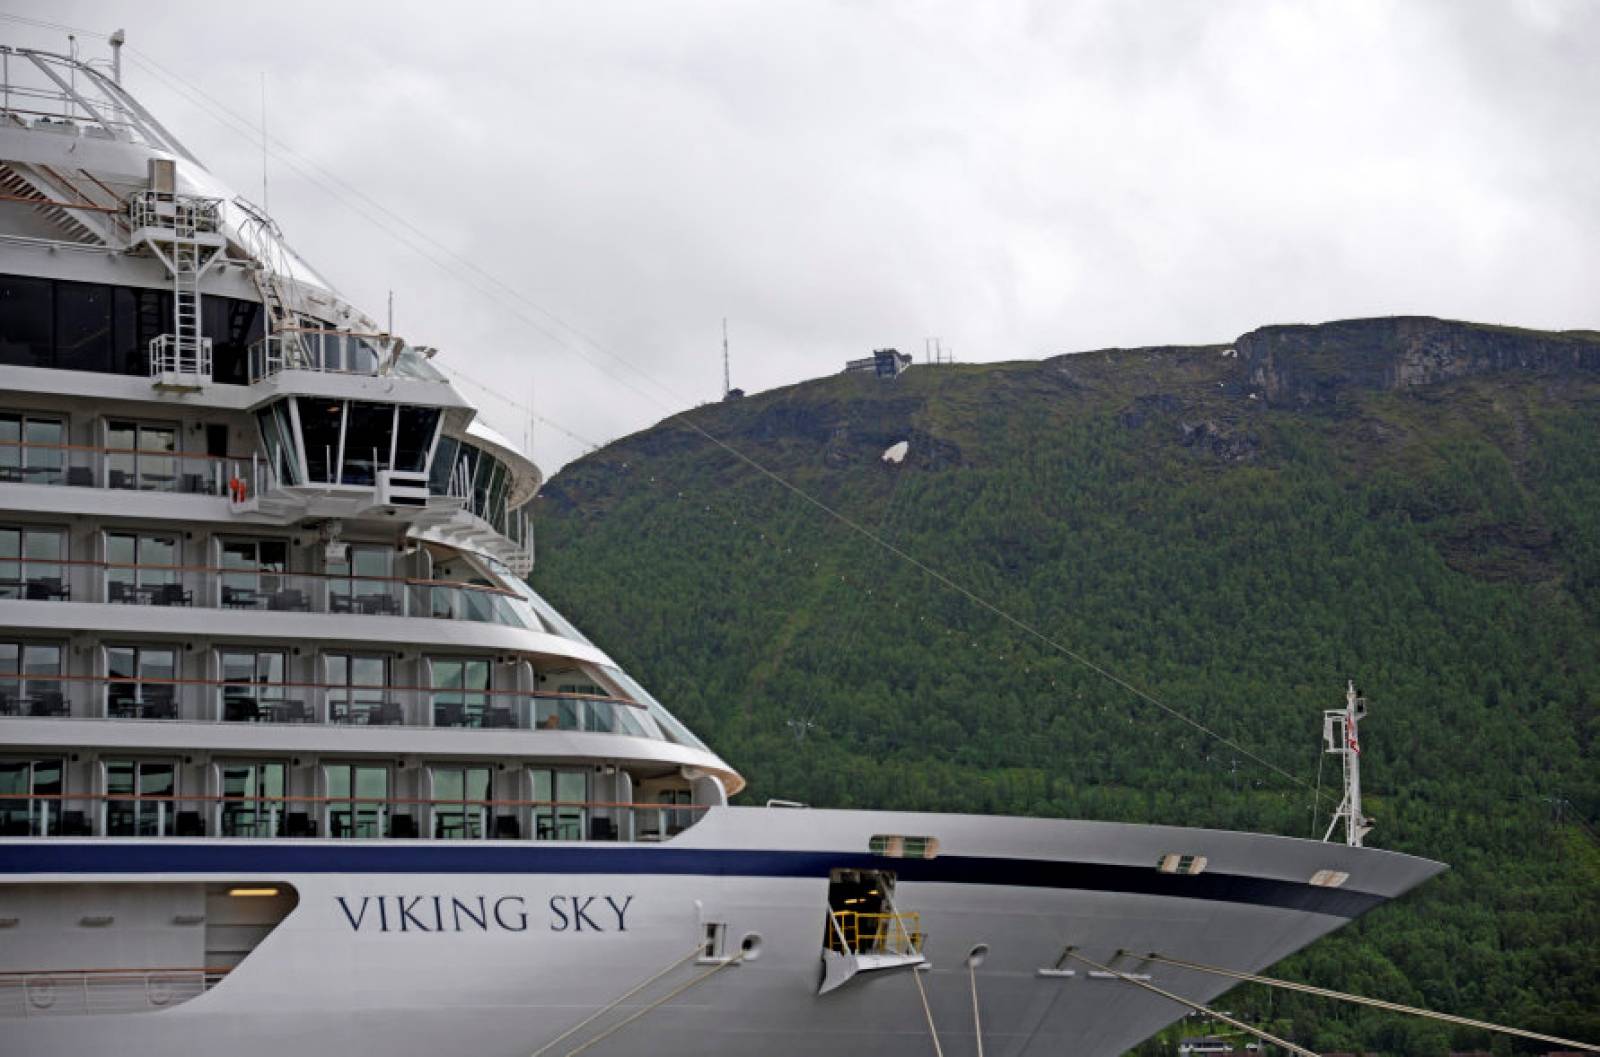 A cruise ship Viking Sky is seen in this undated photo in Tromsoe